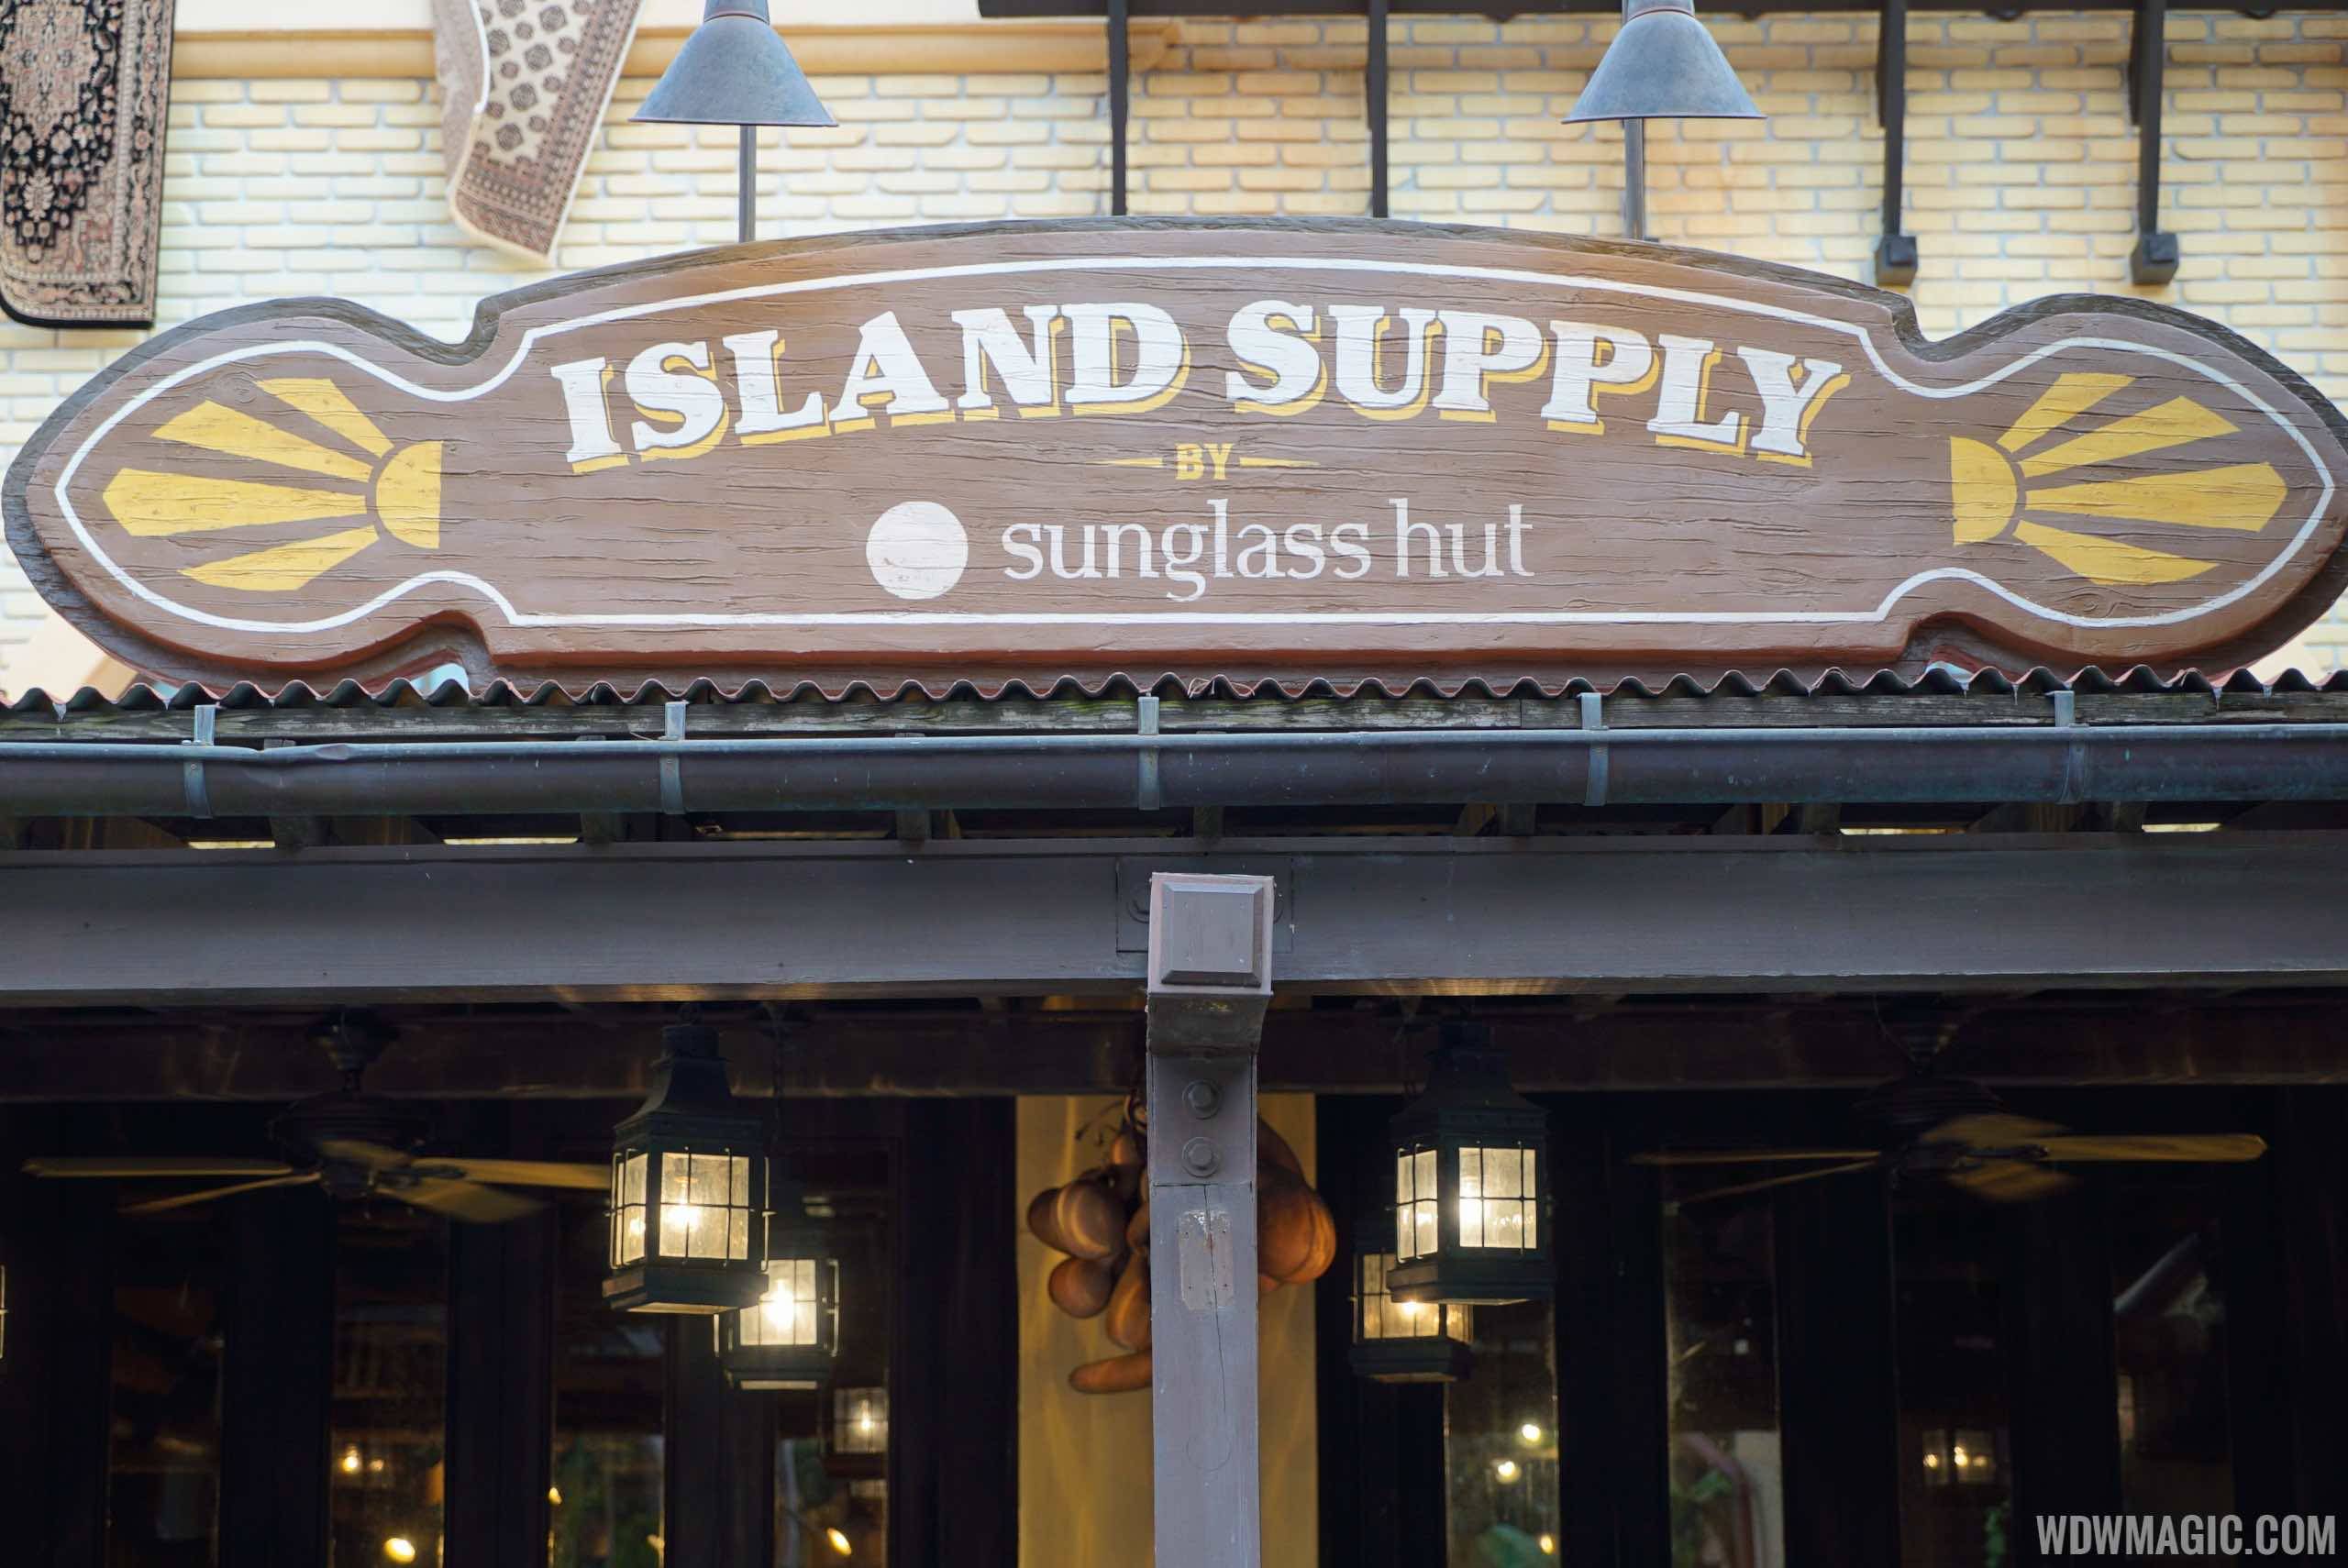 PHOTOS - Magic Kingdom's Island Supply by Sunglass Hut gets new store-front signage